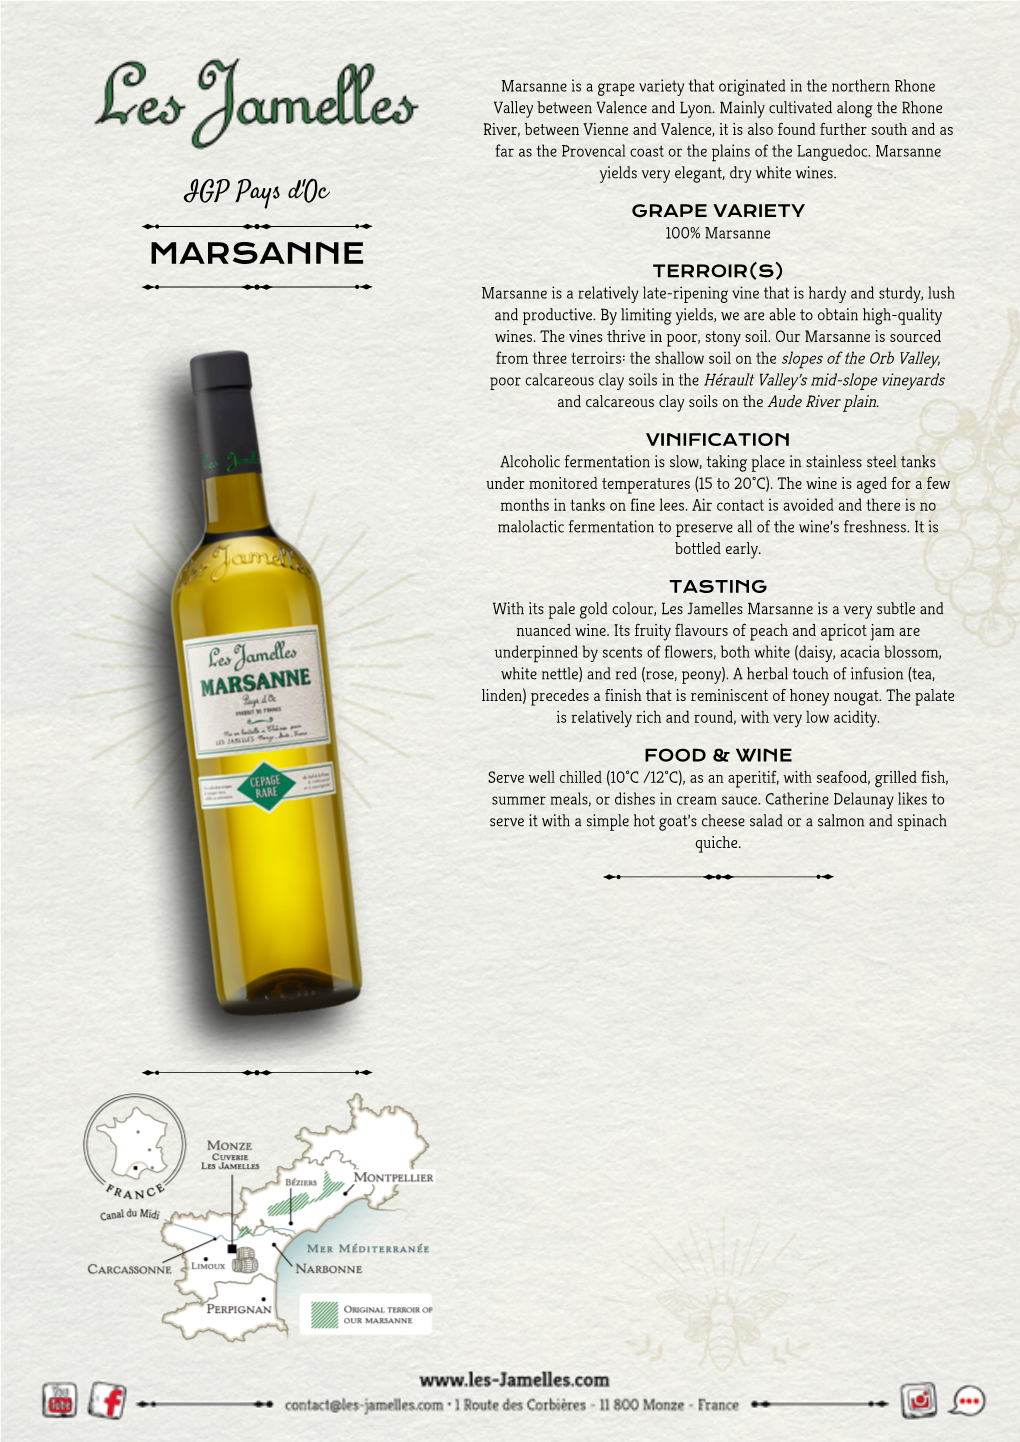 Marsanne Is a Grape Variety That Originated in the Northern Rhone Valley Between Valence and Lyon